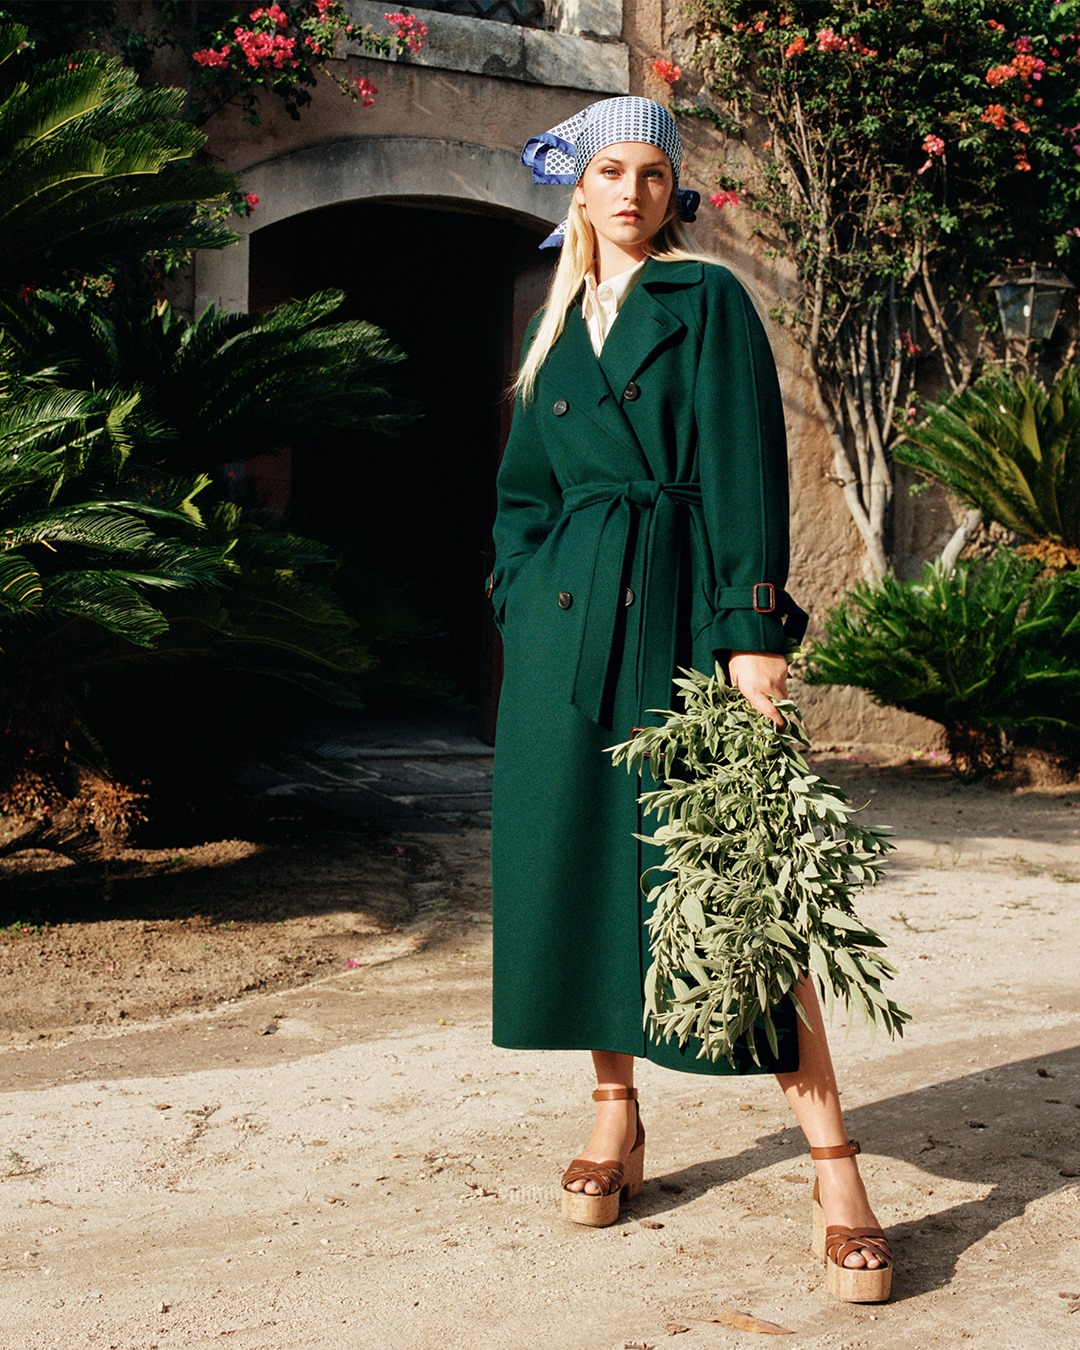 Going back to our roots: the protagonist of the Spring Summer 2021 brand campaign, modeled by Jean Campbell, has added a new dimension to her lifestyle. Returning back to one's roots. Away from the chaos of the urban landscape, the new normality calls for nature. 